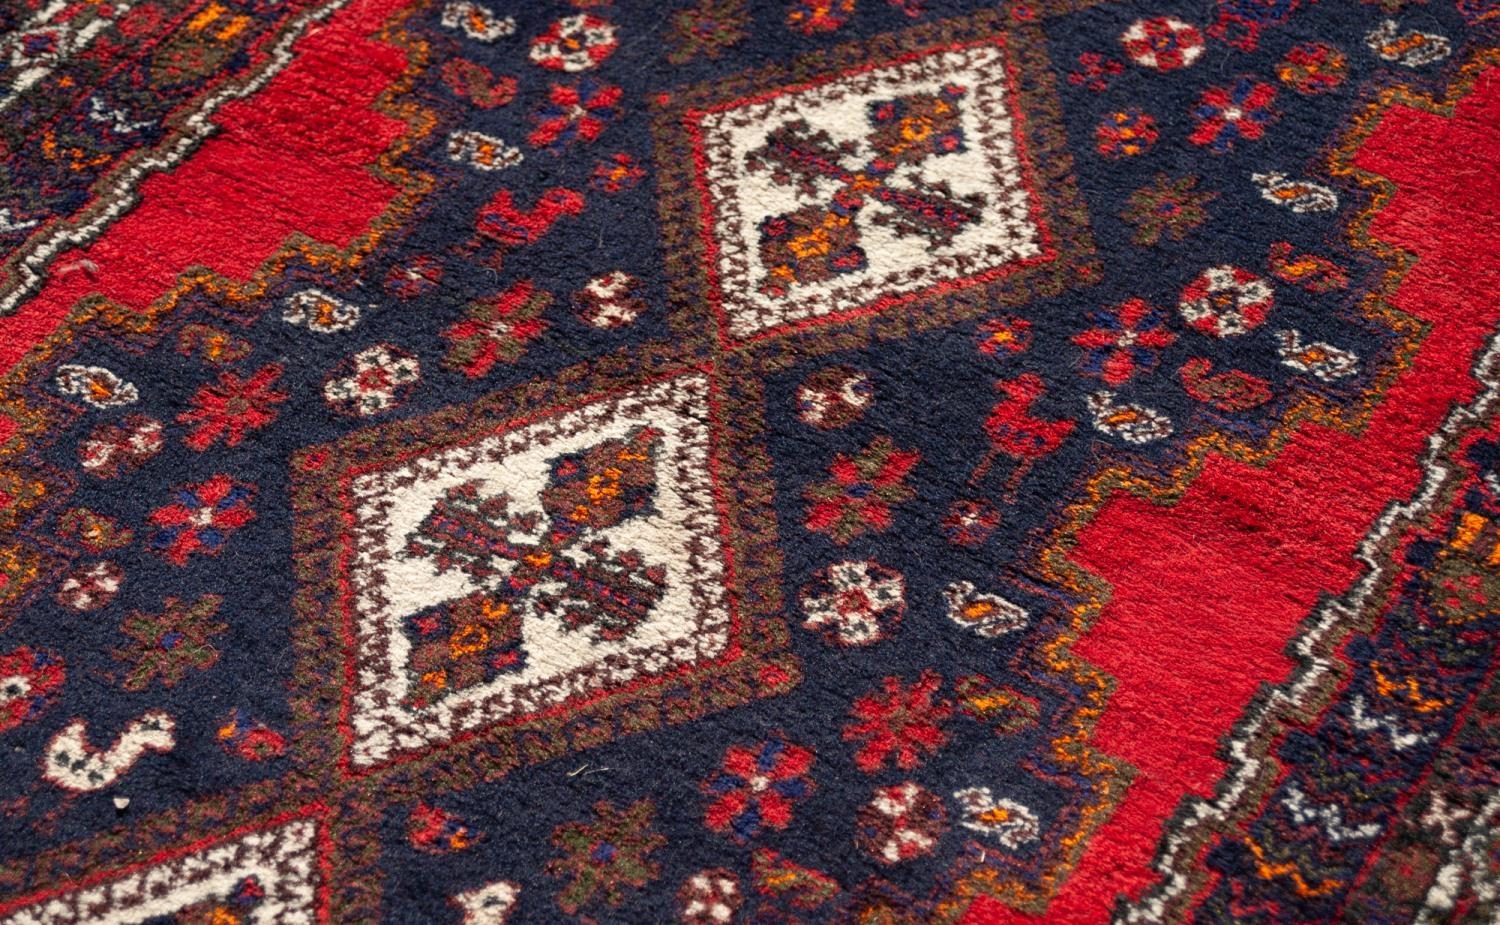 LARGE SHIRAZ RUG WITH A CHAIN OF FOUR WHITE GROUND DIAMOND SHAPED CENTRE MEDALLIONS, on a black - Image 2 of 4